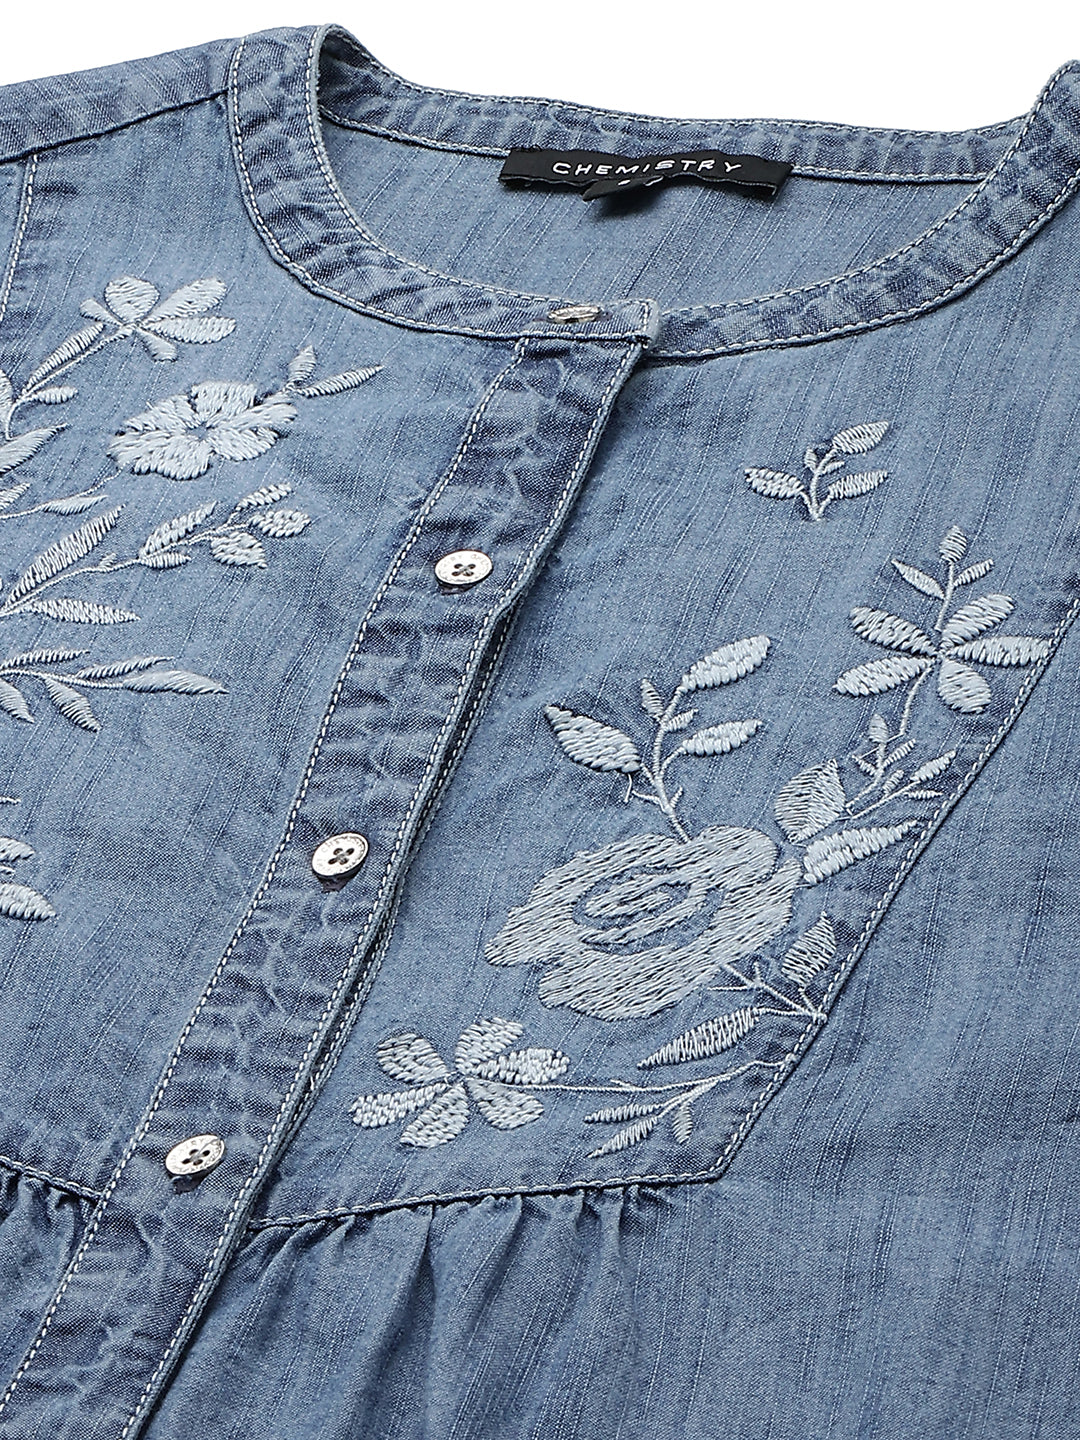 Mid Wash, Light Weight Denim Longline Shirt With Embroidered Yoke